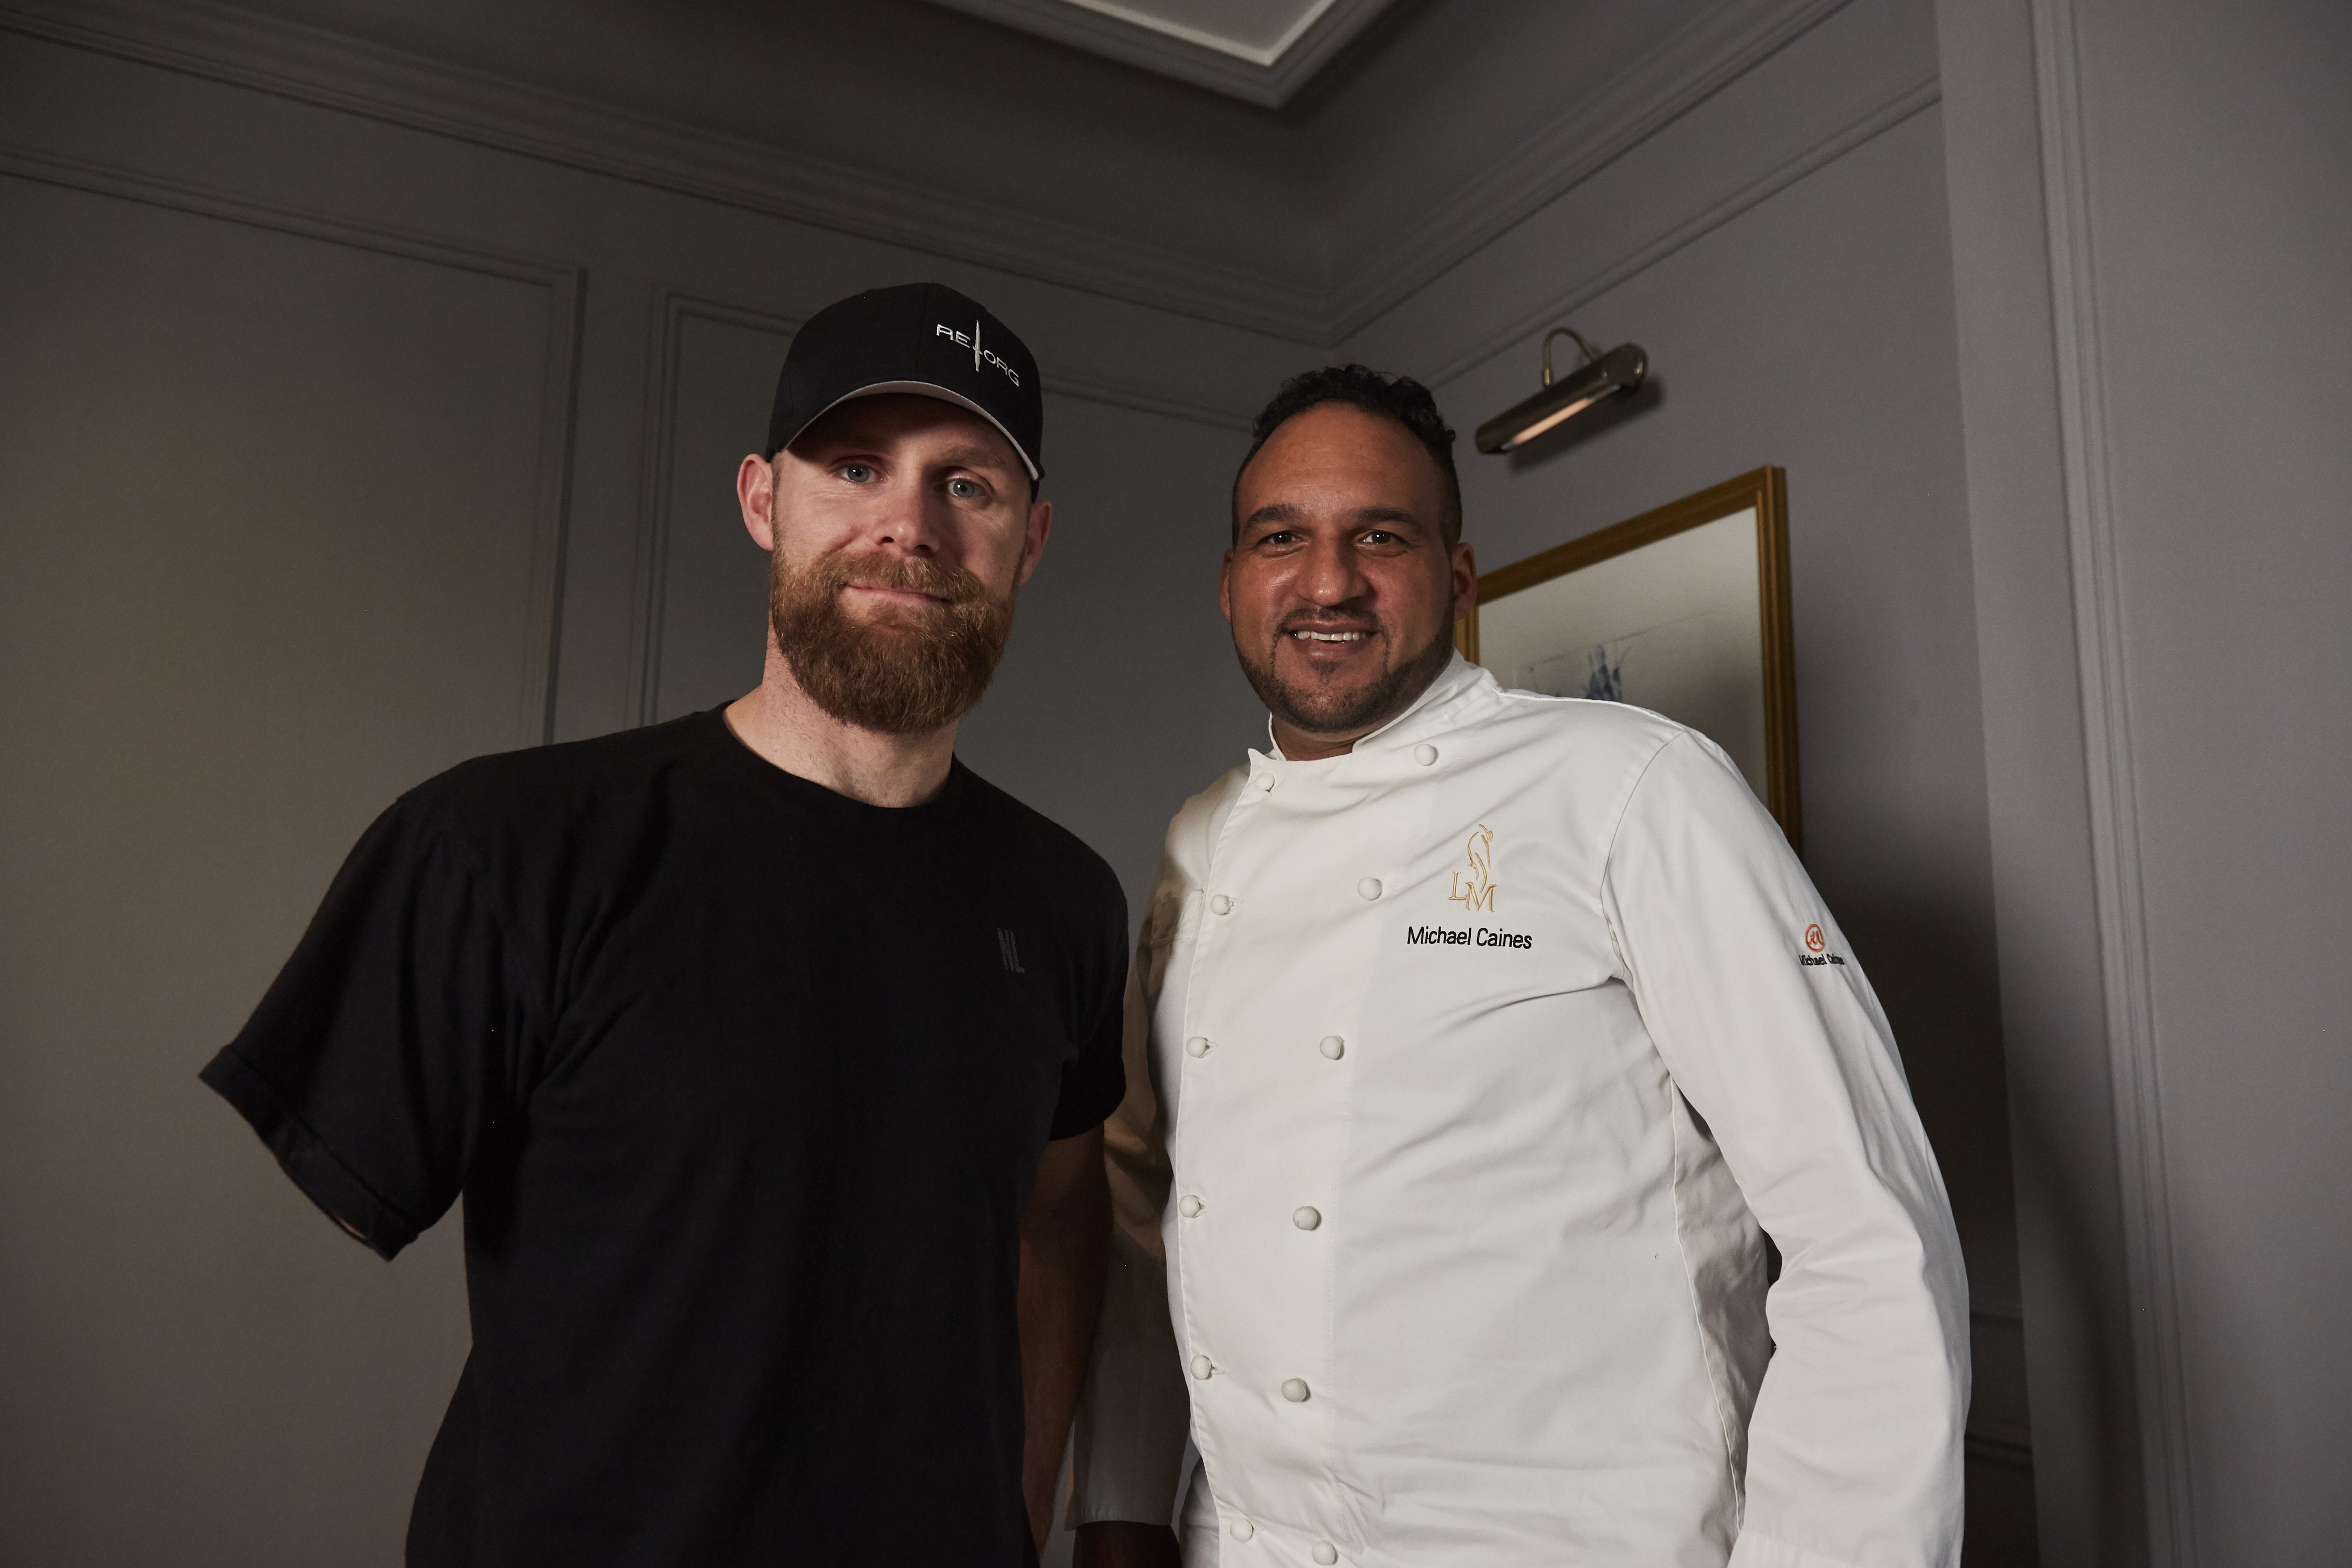 Remastered - Michael Caines and Mark Ormrod